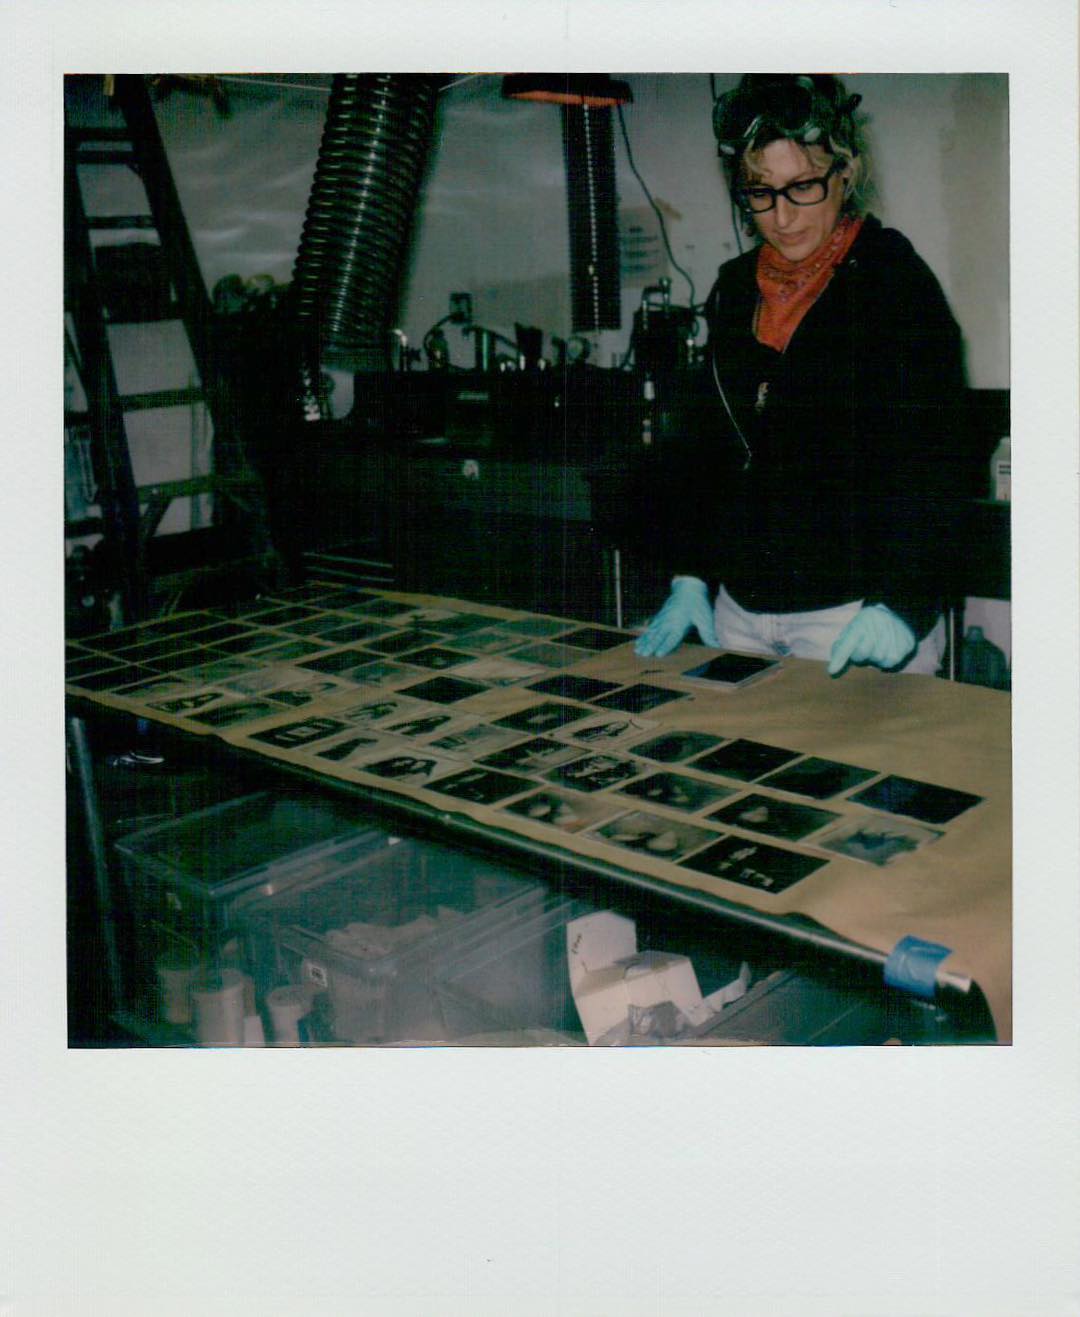 @elmalayheehoo looks over the results of the Wet Plate Collodion workshop she taught at @penumbrafoundation this weekend #sx70 #polaroid #polaroidoriginals #film #filmphotography #wetplate #wetplatecollodion #theoriginalinstantphotography